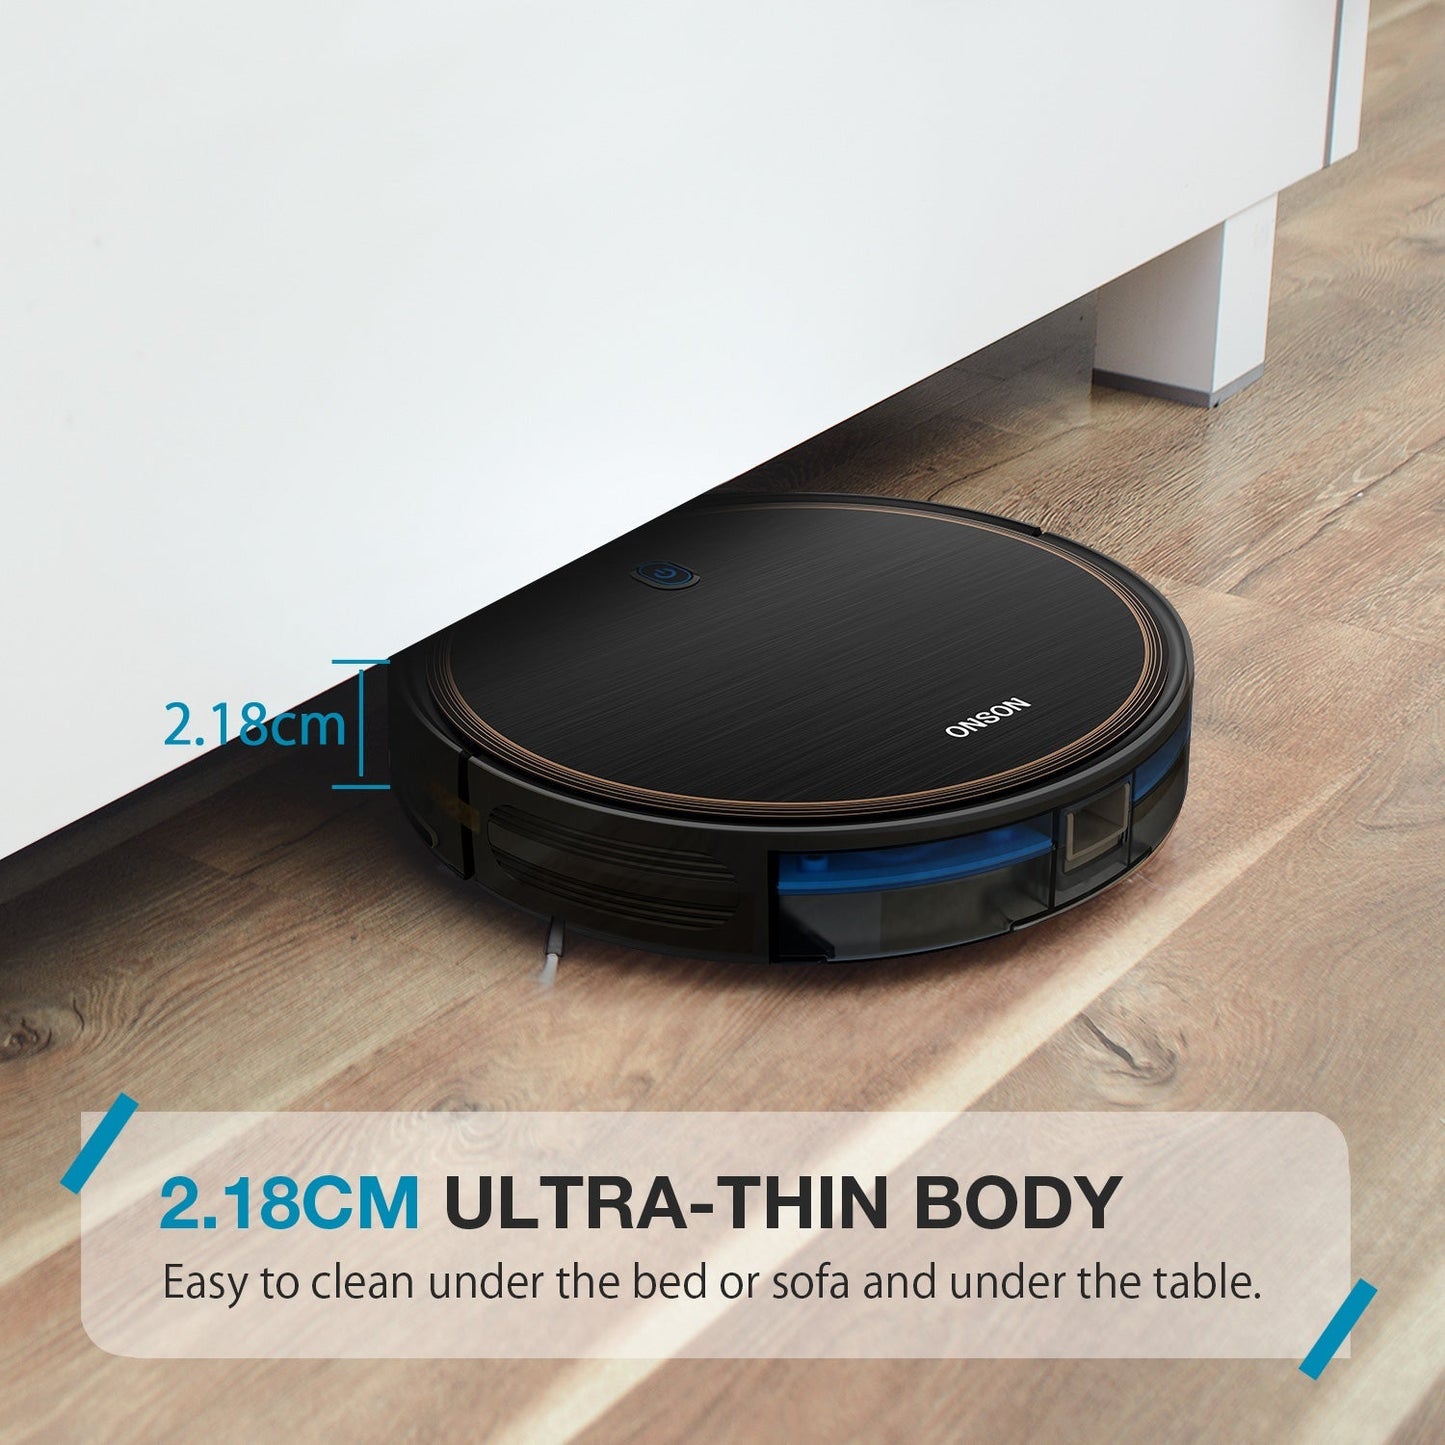 Best Selling Products 2020 in USA Amazon Top Sellers Robot Vacuums for Amazon baby magazin 